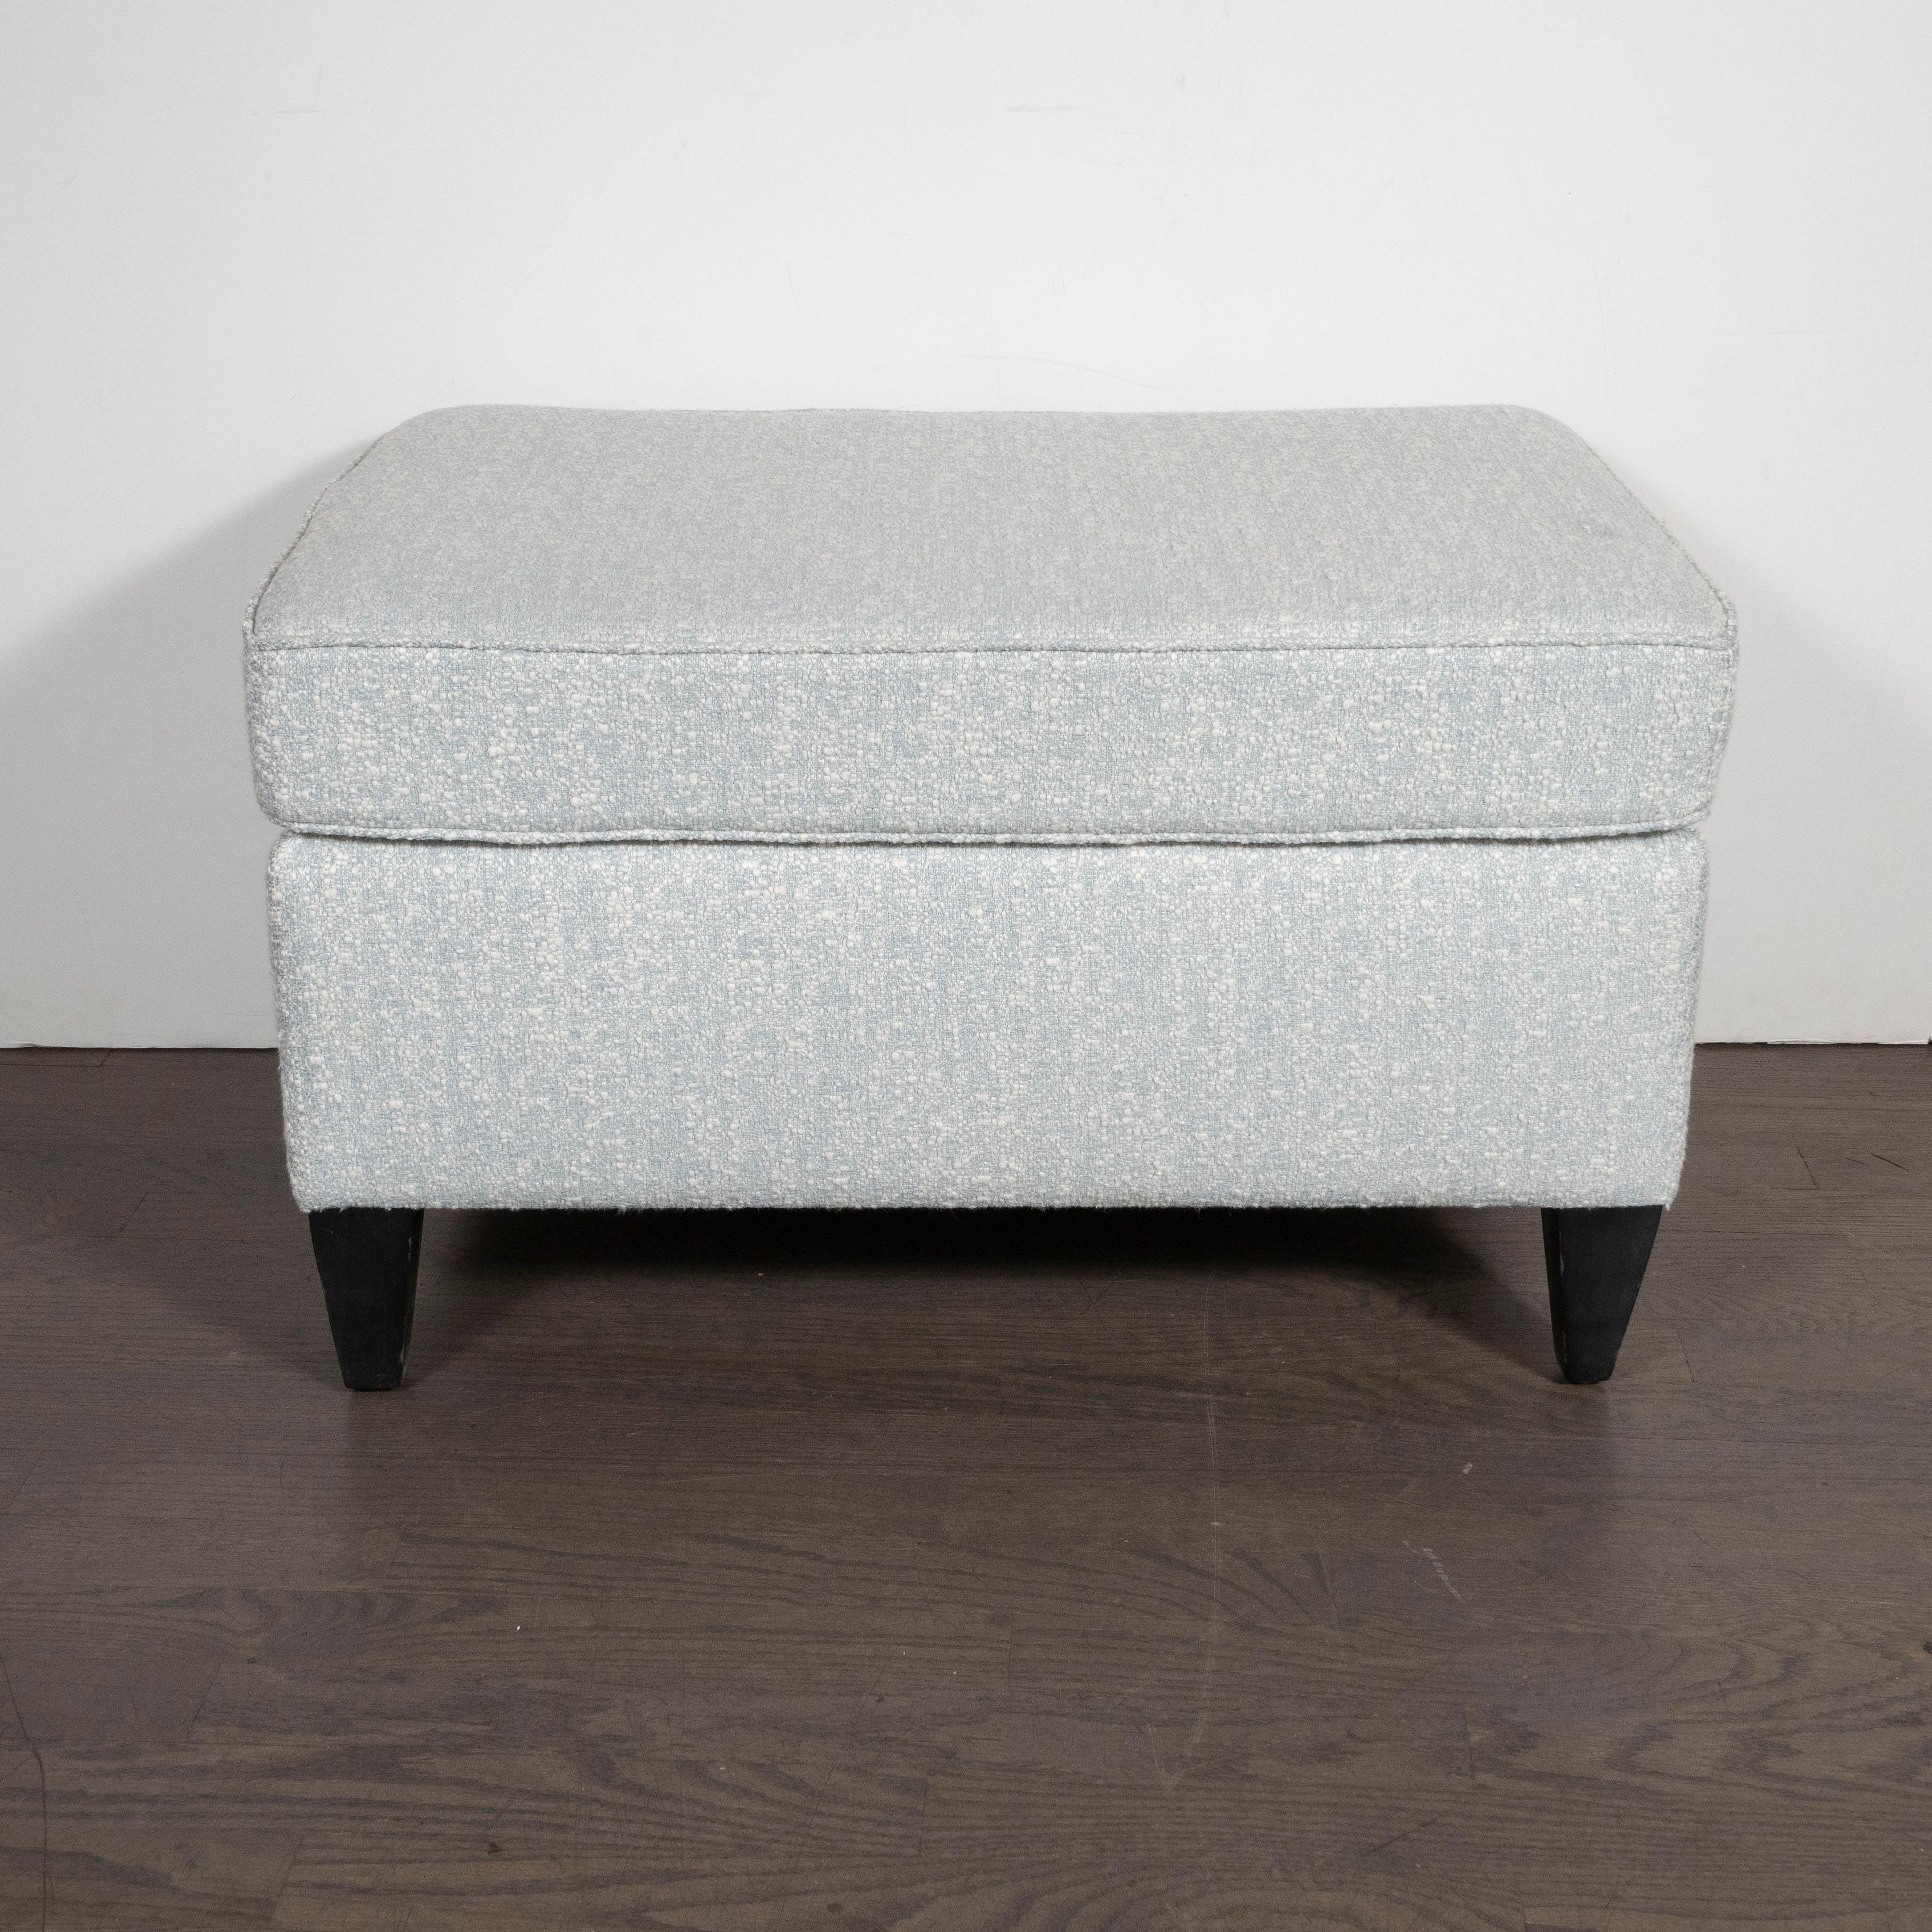 This refined and understated ottoman were designed by Paul McCobb- one of the most celebrated and influential figures in 20th century design- in America, circa 1950. The ottoman offers conical legs in ebonized walnut. McCobb once opined: “Design